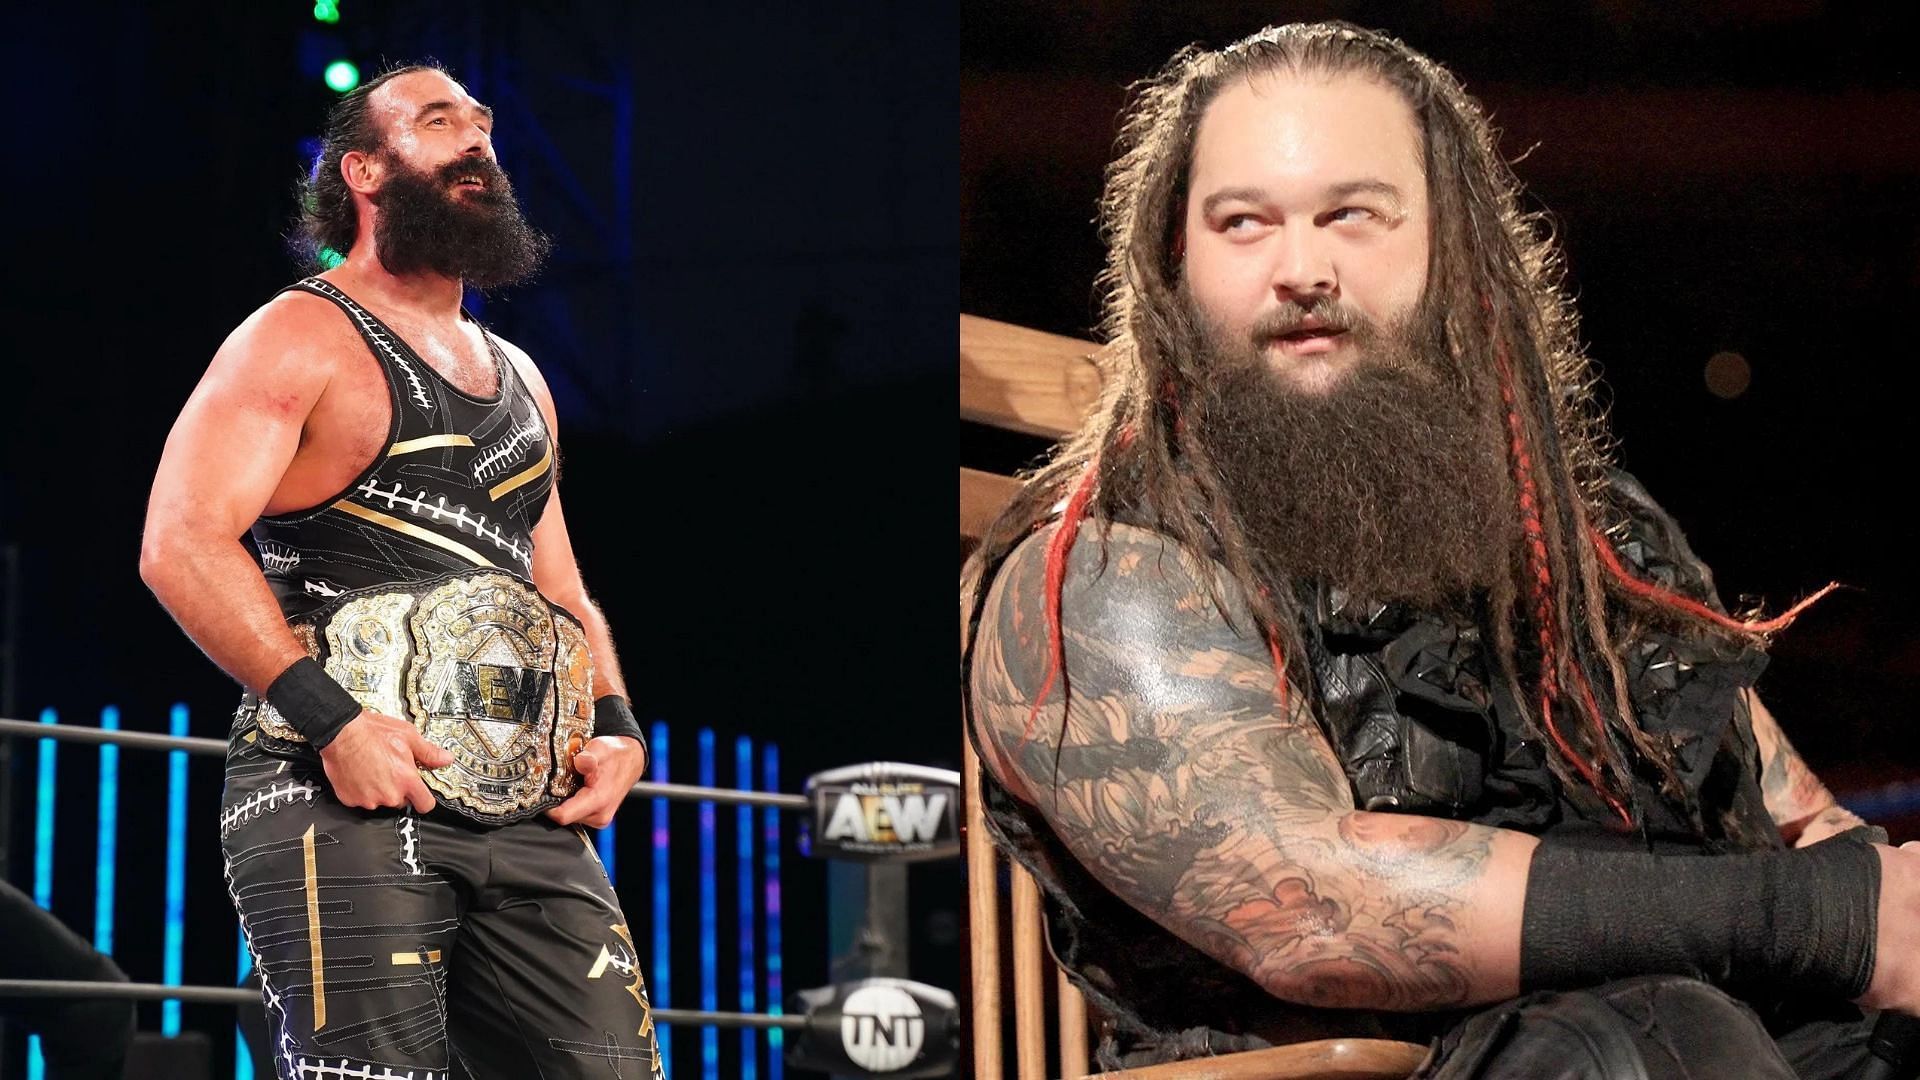 Brodie Lee and some AEW stars were spotted during tribute to Bray Wyatt tonight on SmackDown